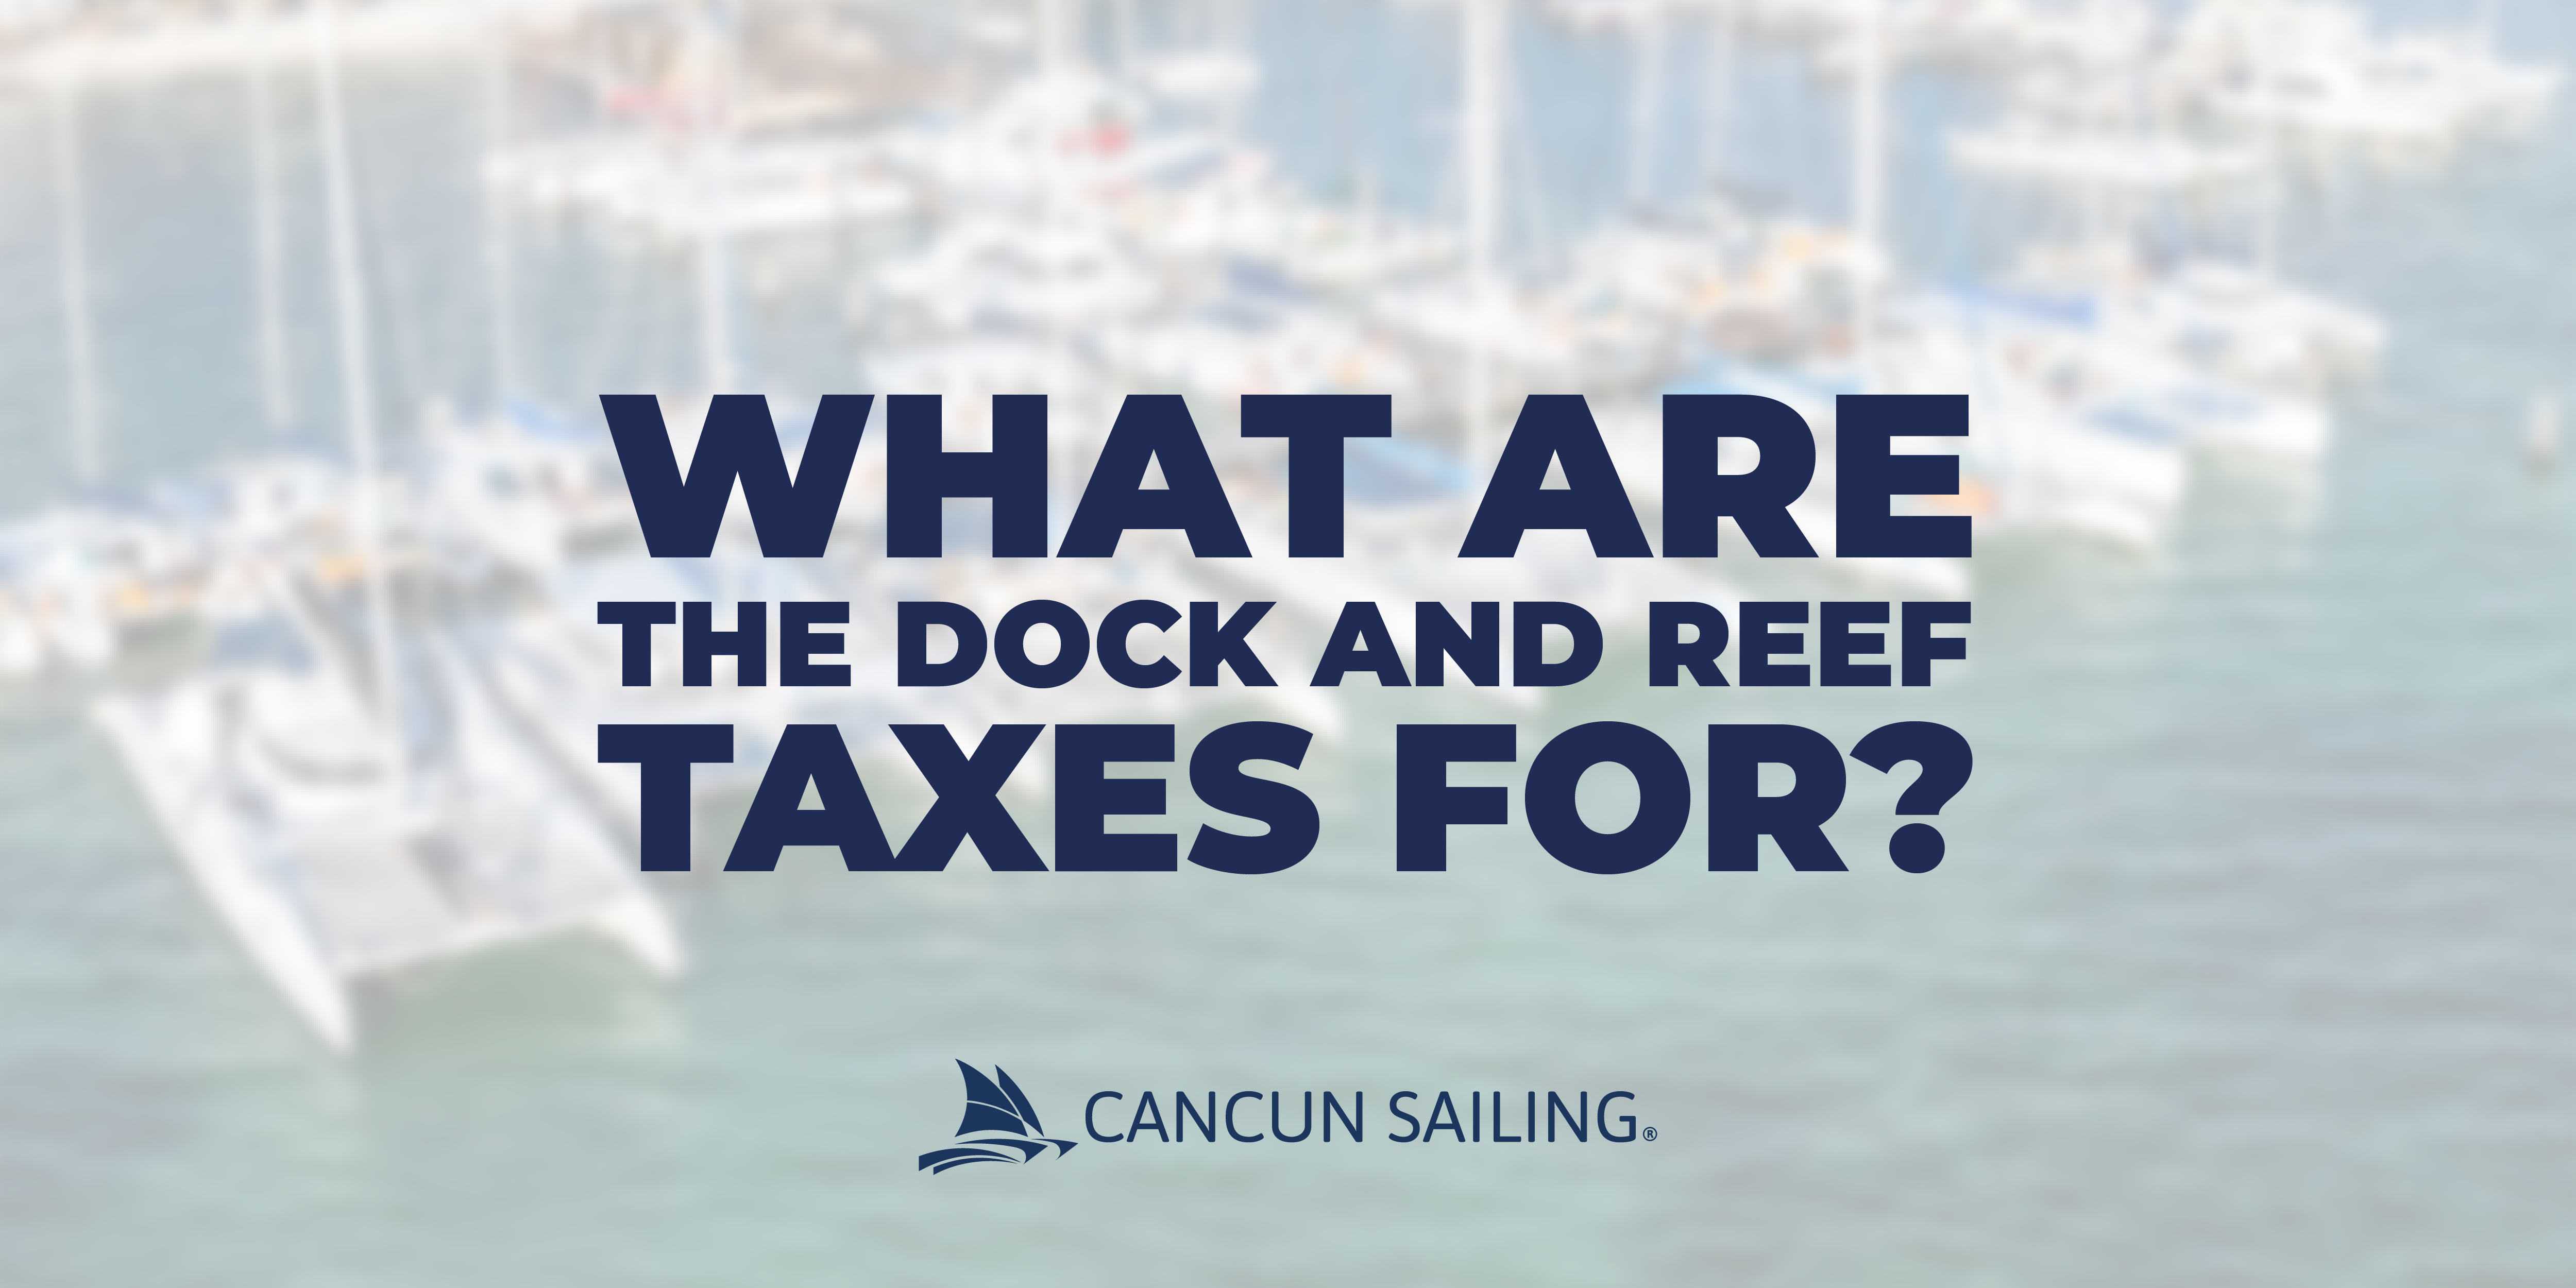 Dock and reef tax in Cancun Sailing